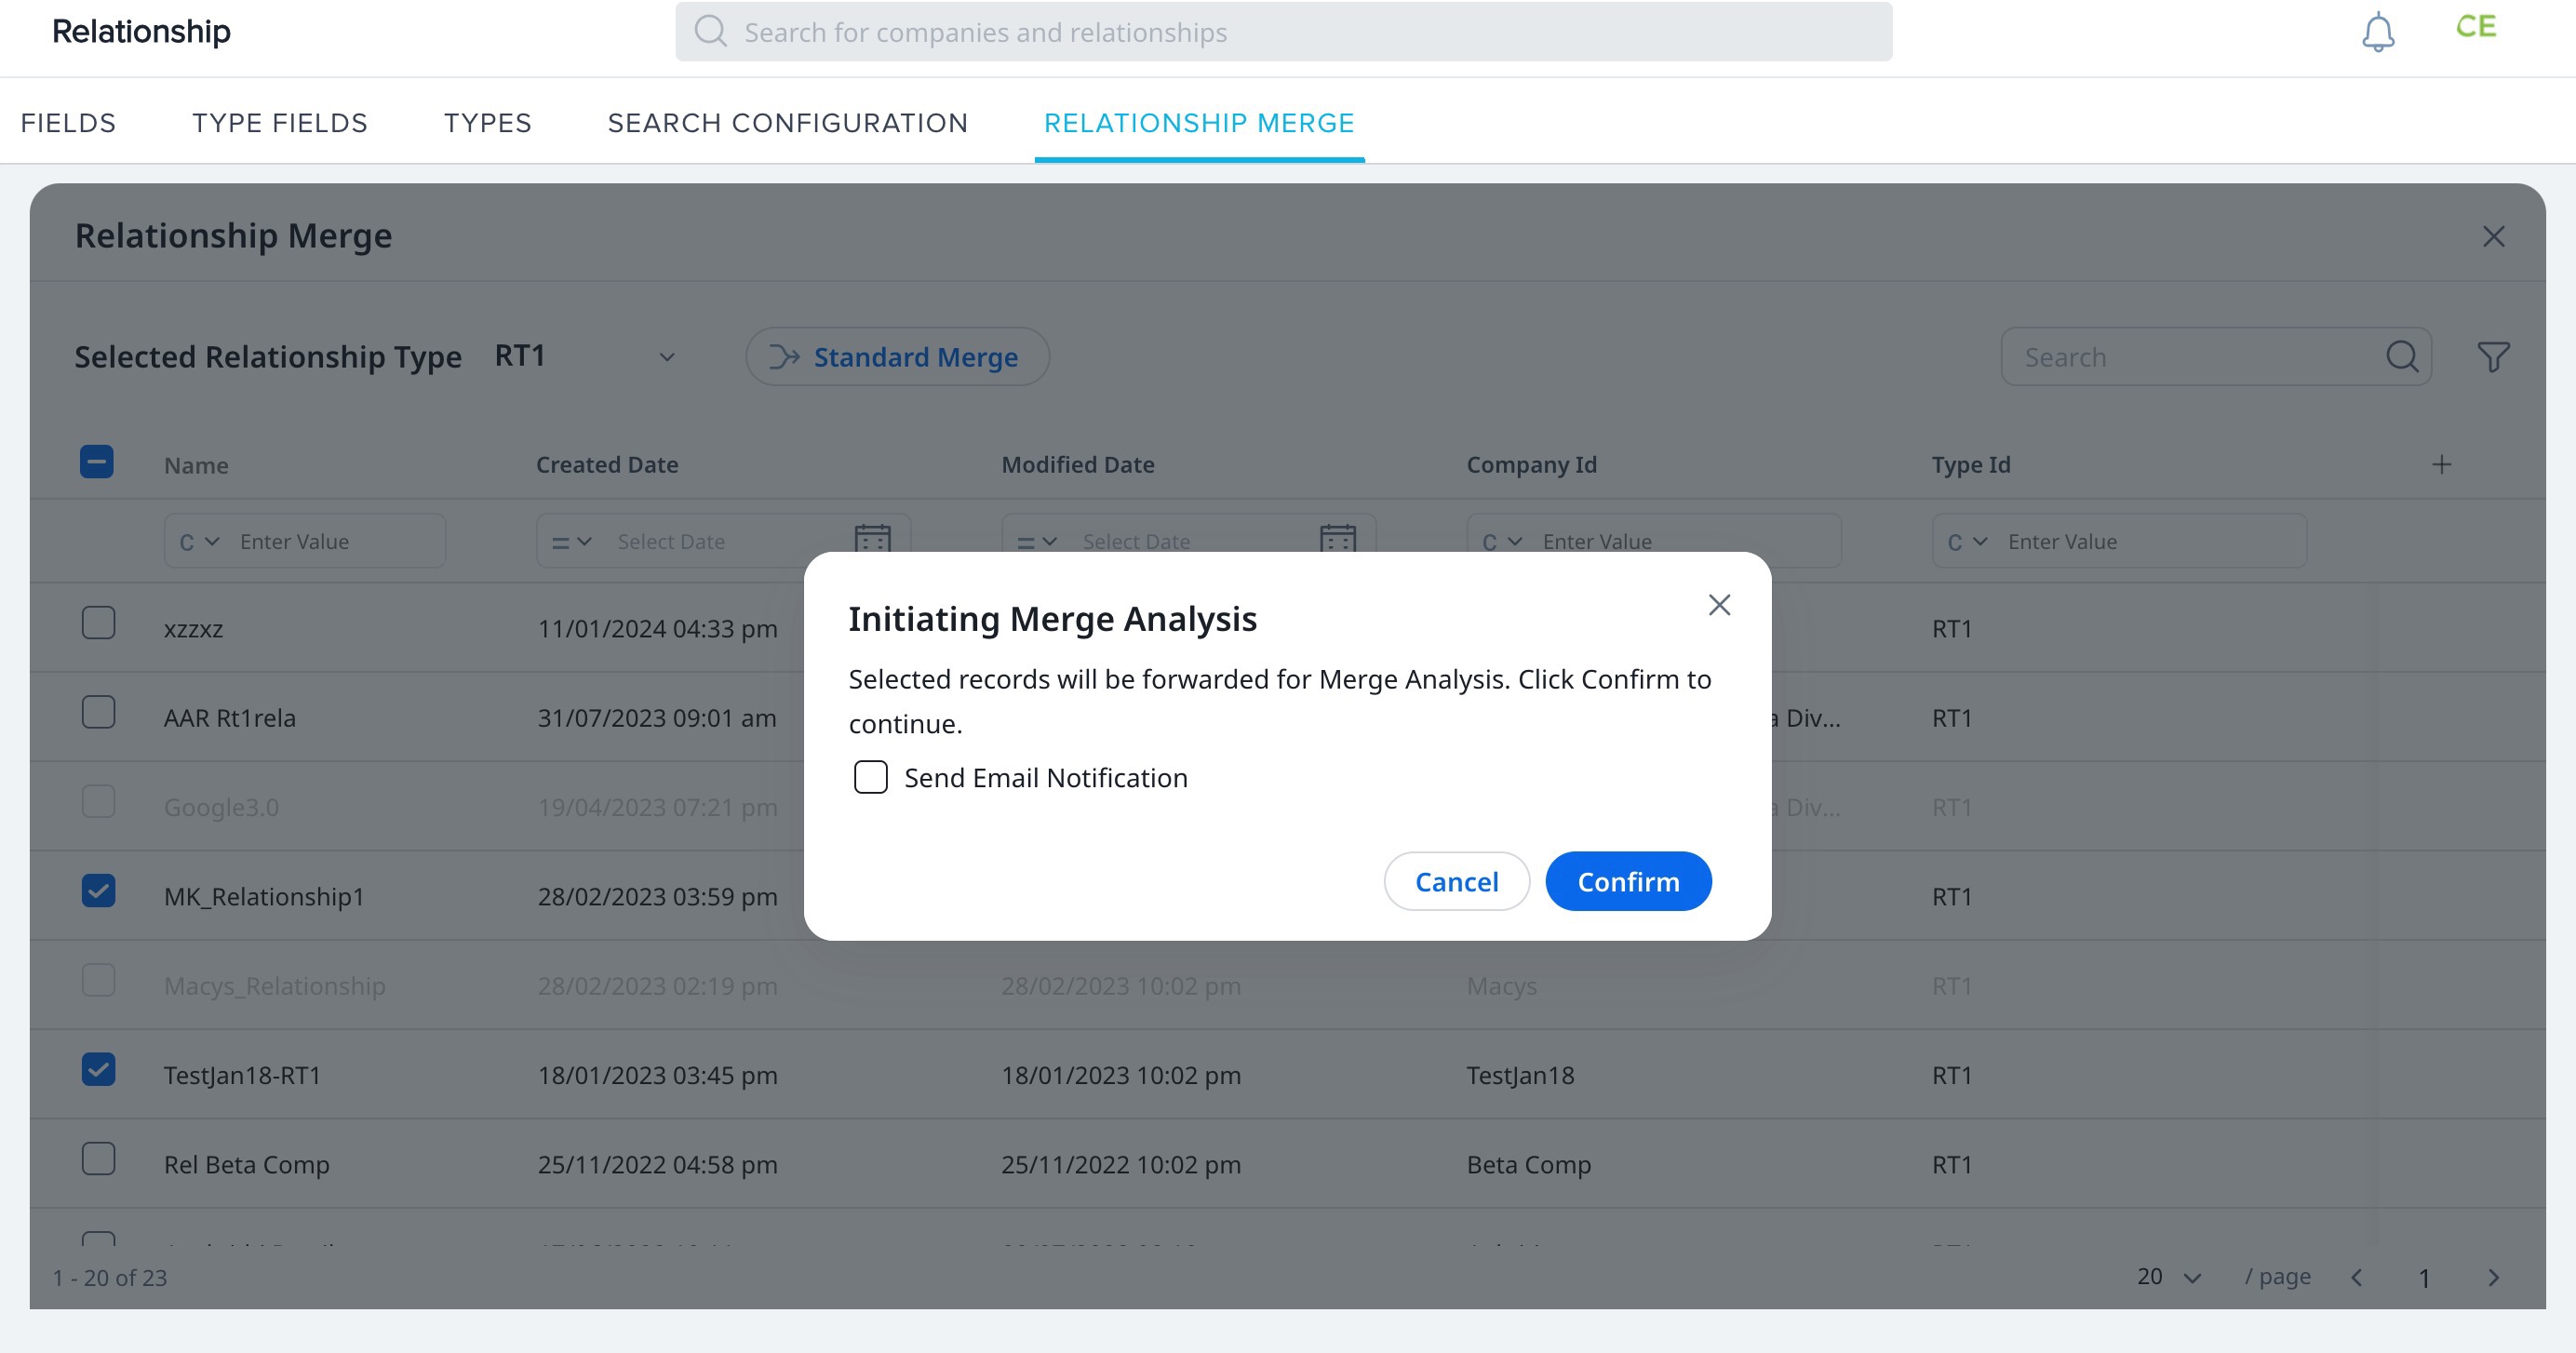 Modal dialog box titled 'Initiating Merge Analysis' with options to confirm or send email notification in a relationship management system.